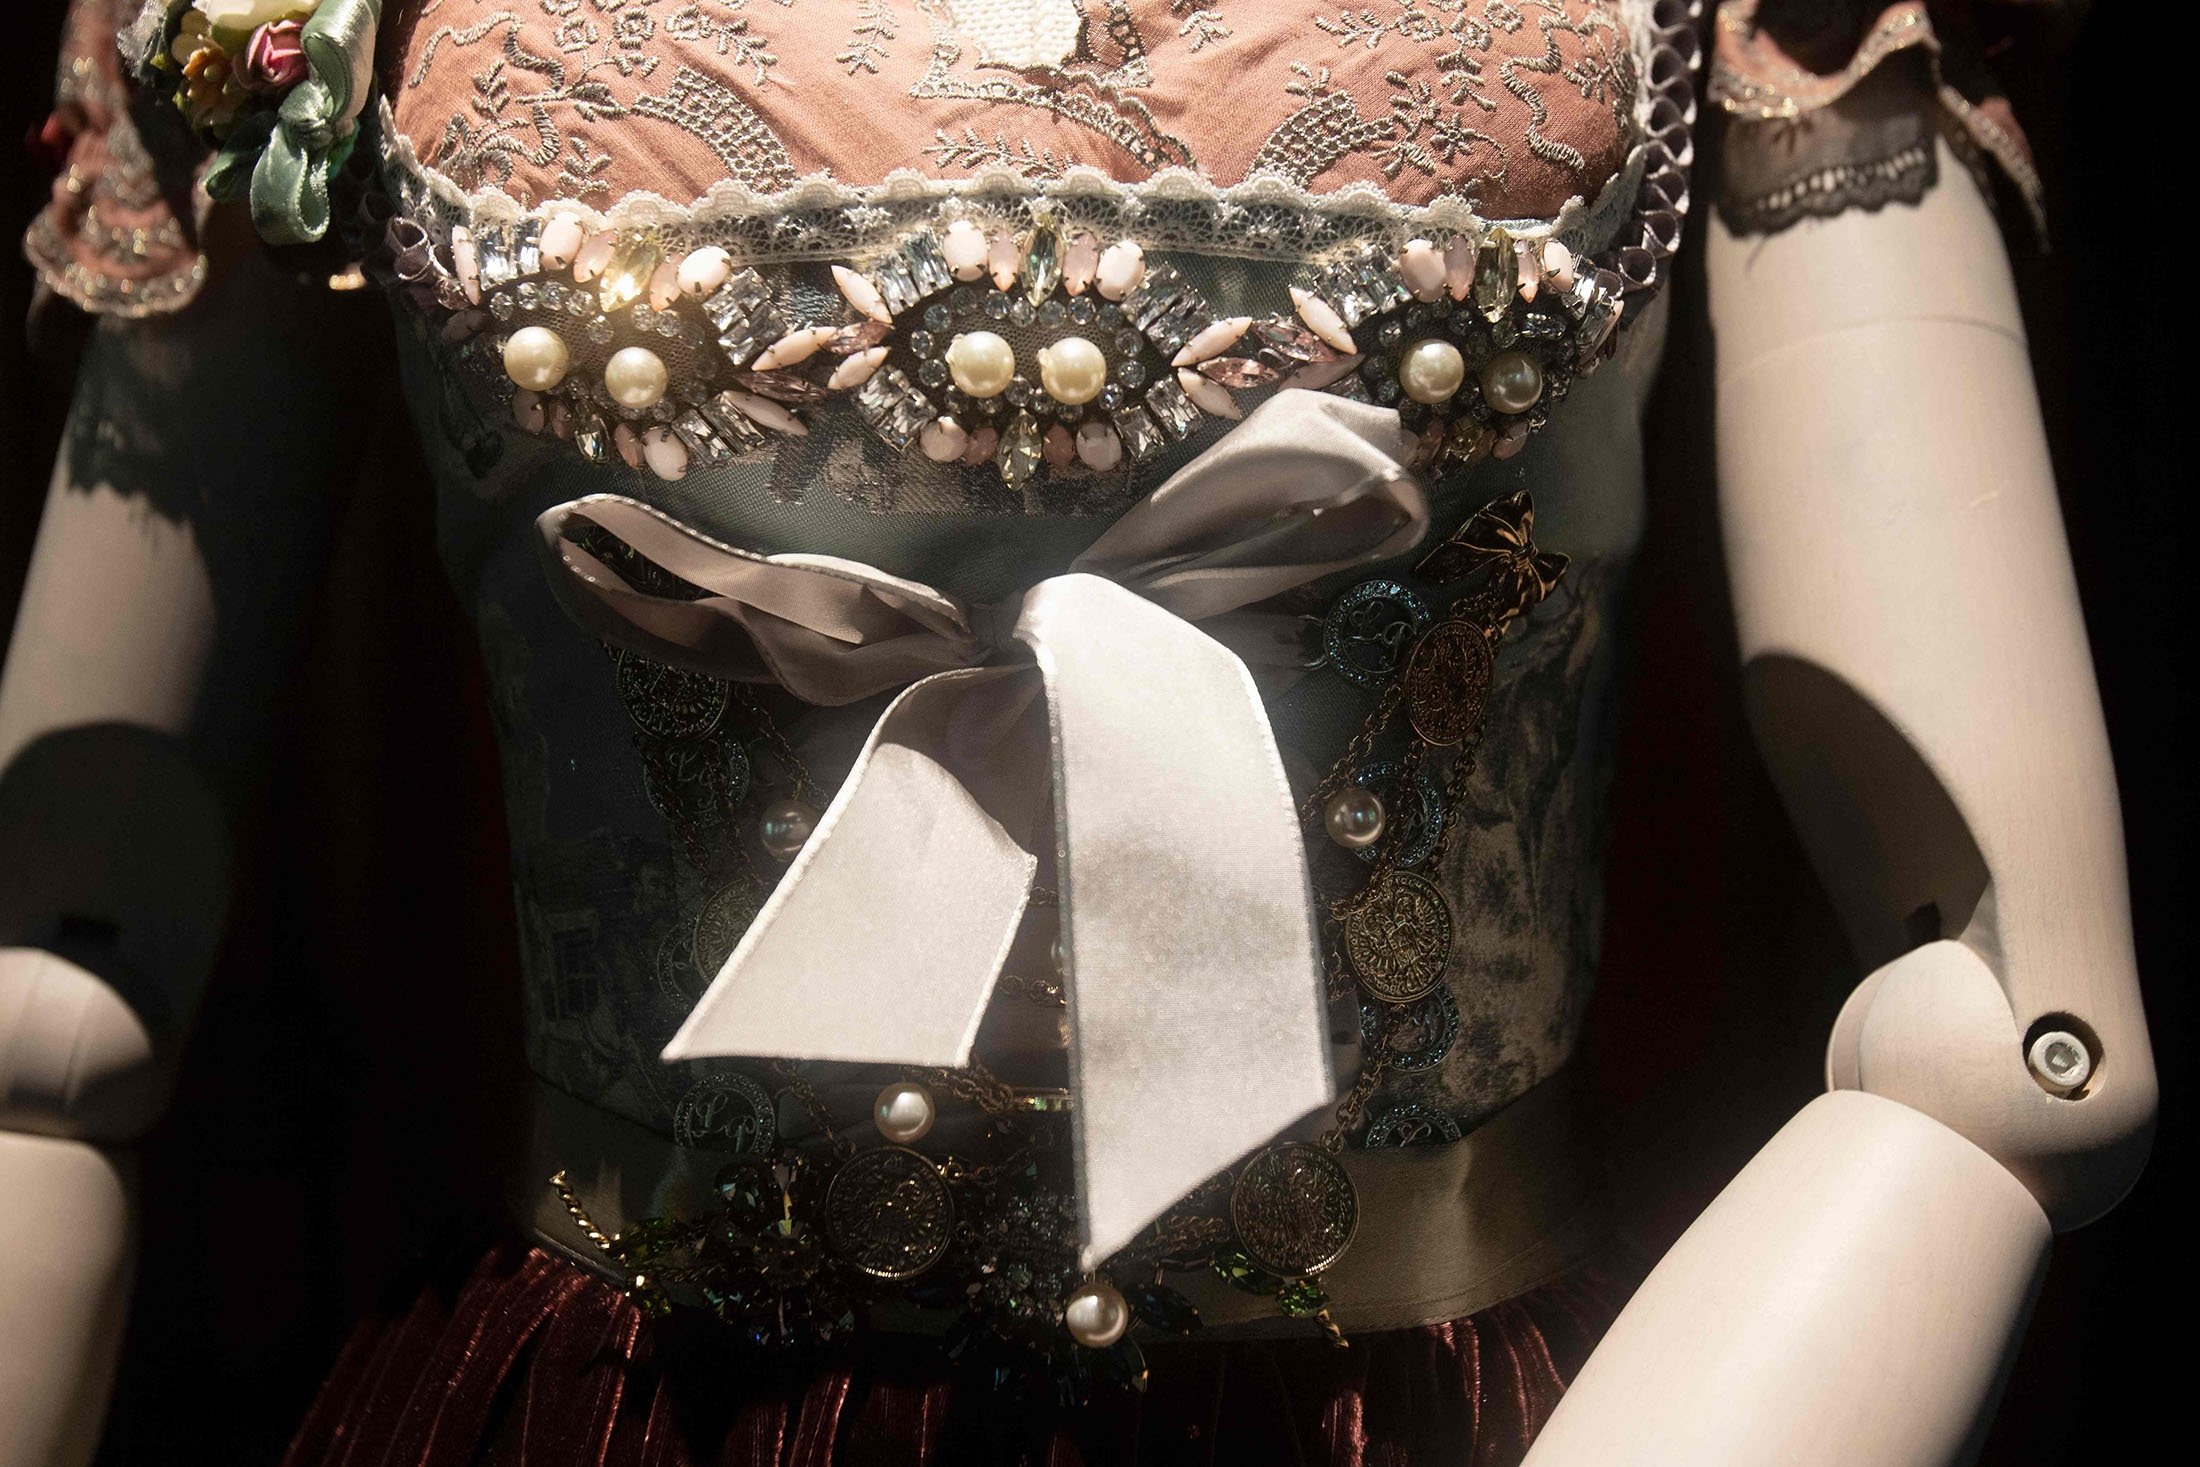 A dirndl dress is on display at the exhibition 